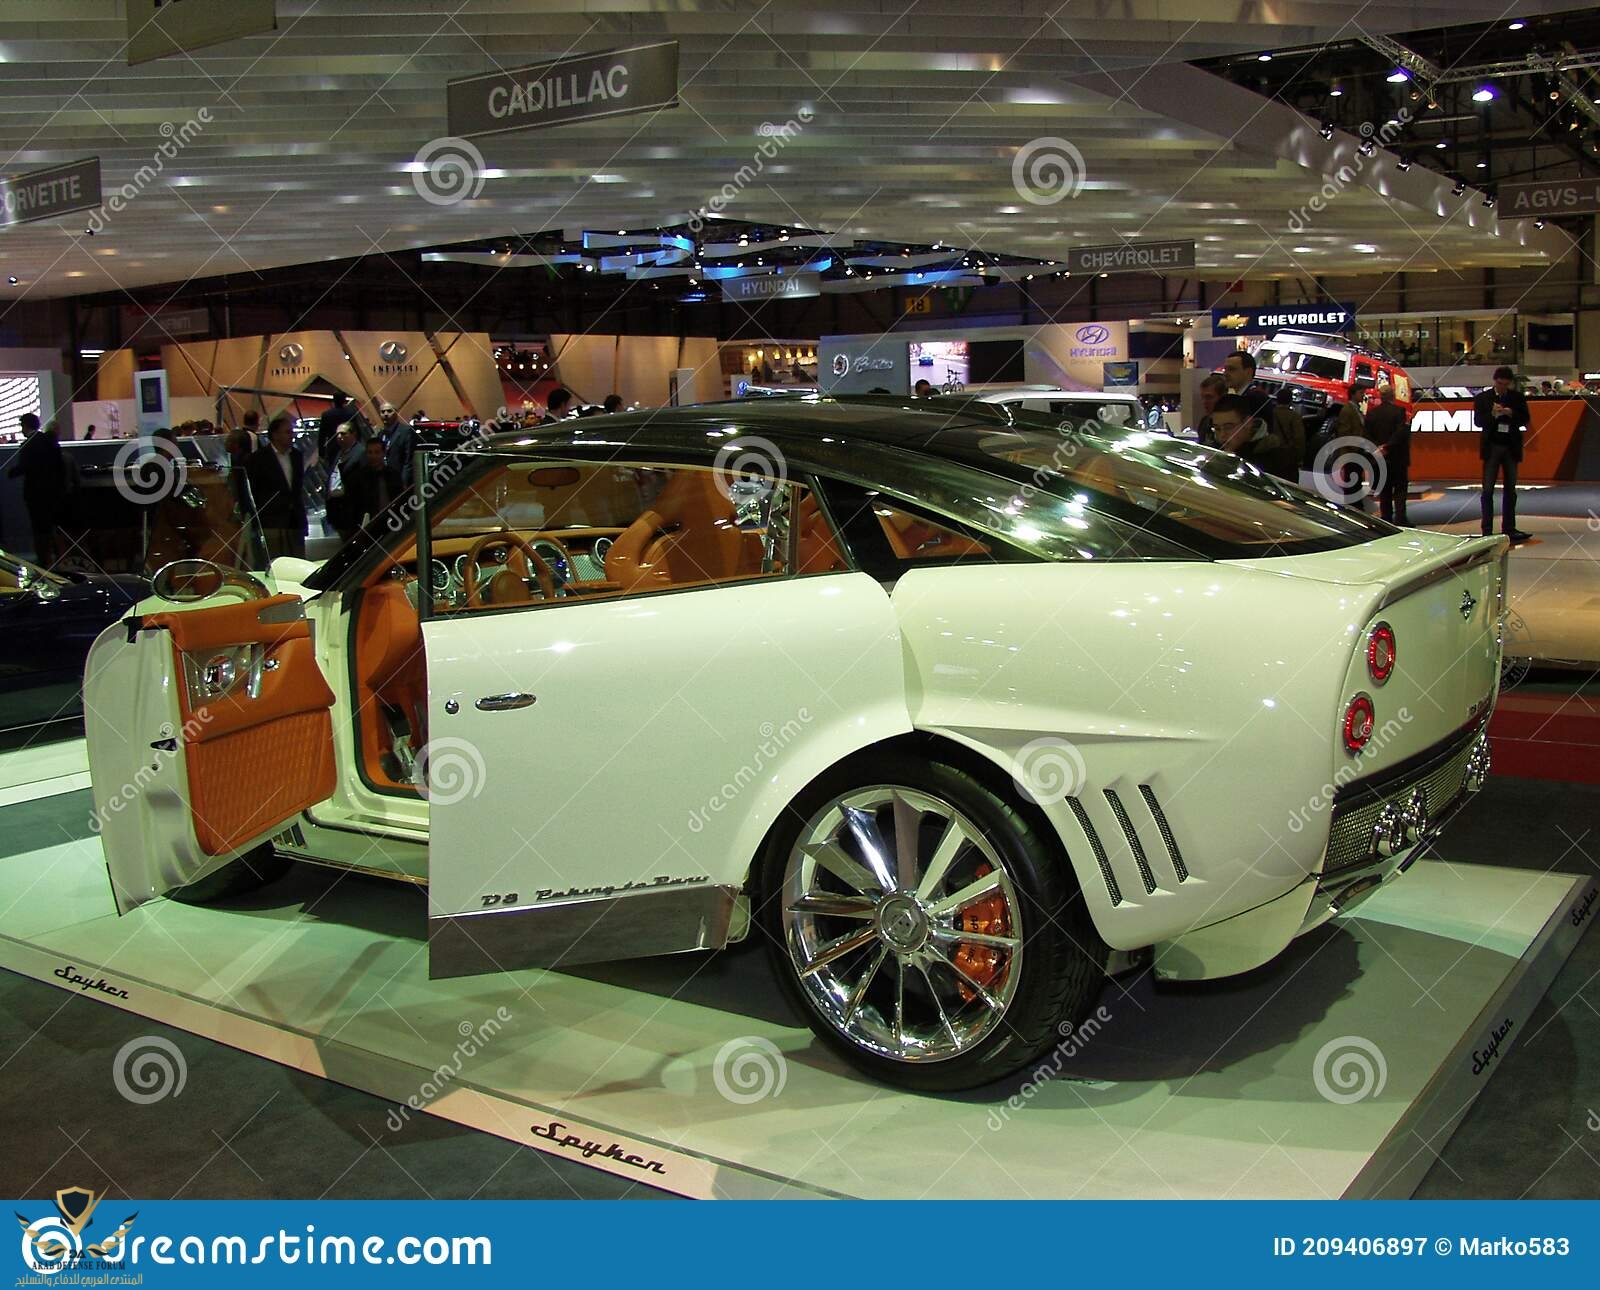 spyker-d-peking-to-paris-mid-size-luxury-crossover-suv-produced-dutch-car-manufacturer-cars-wa...jpg